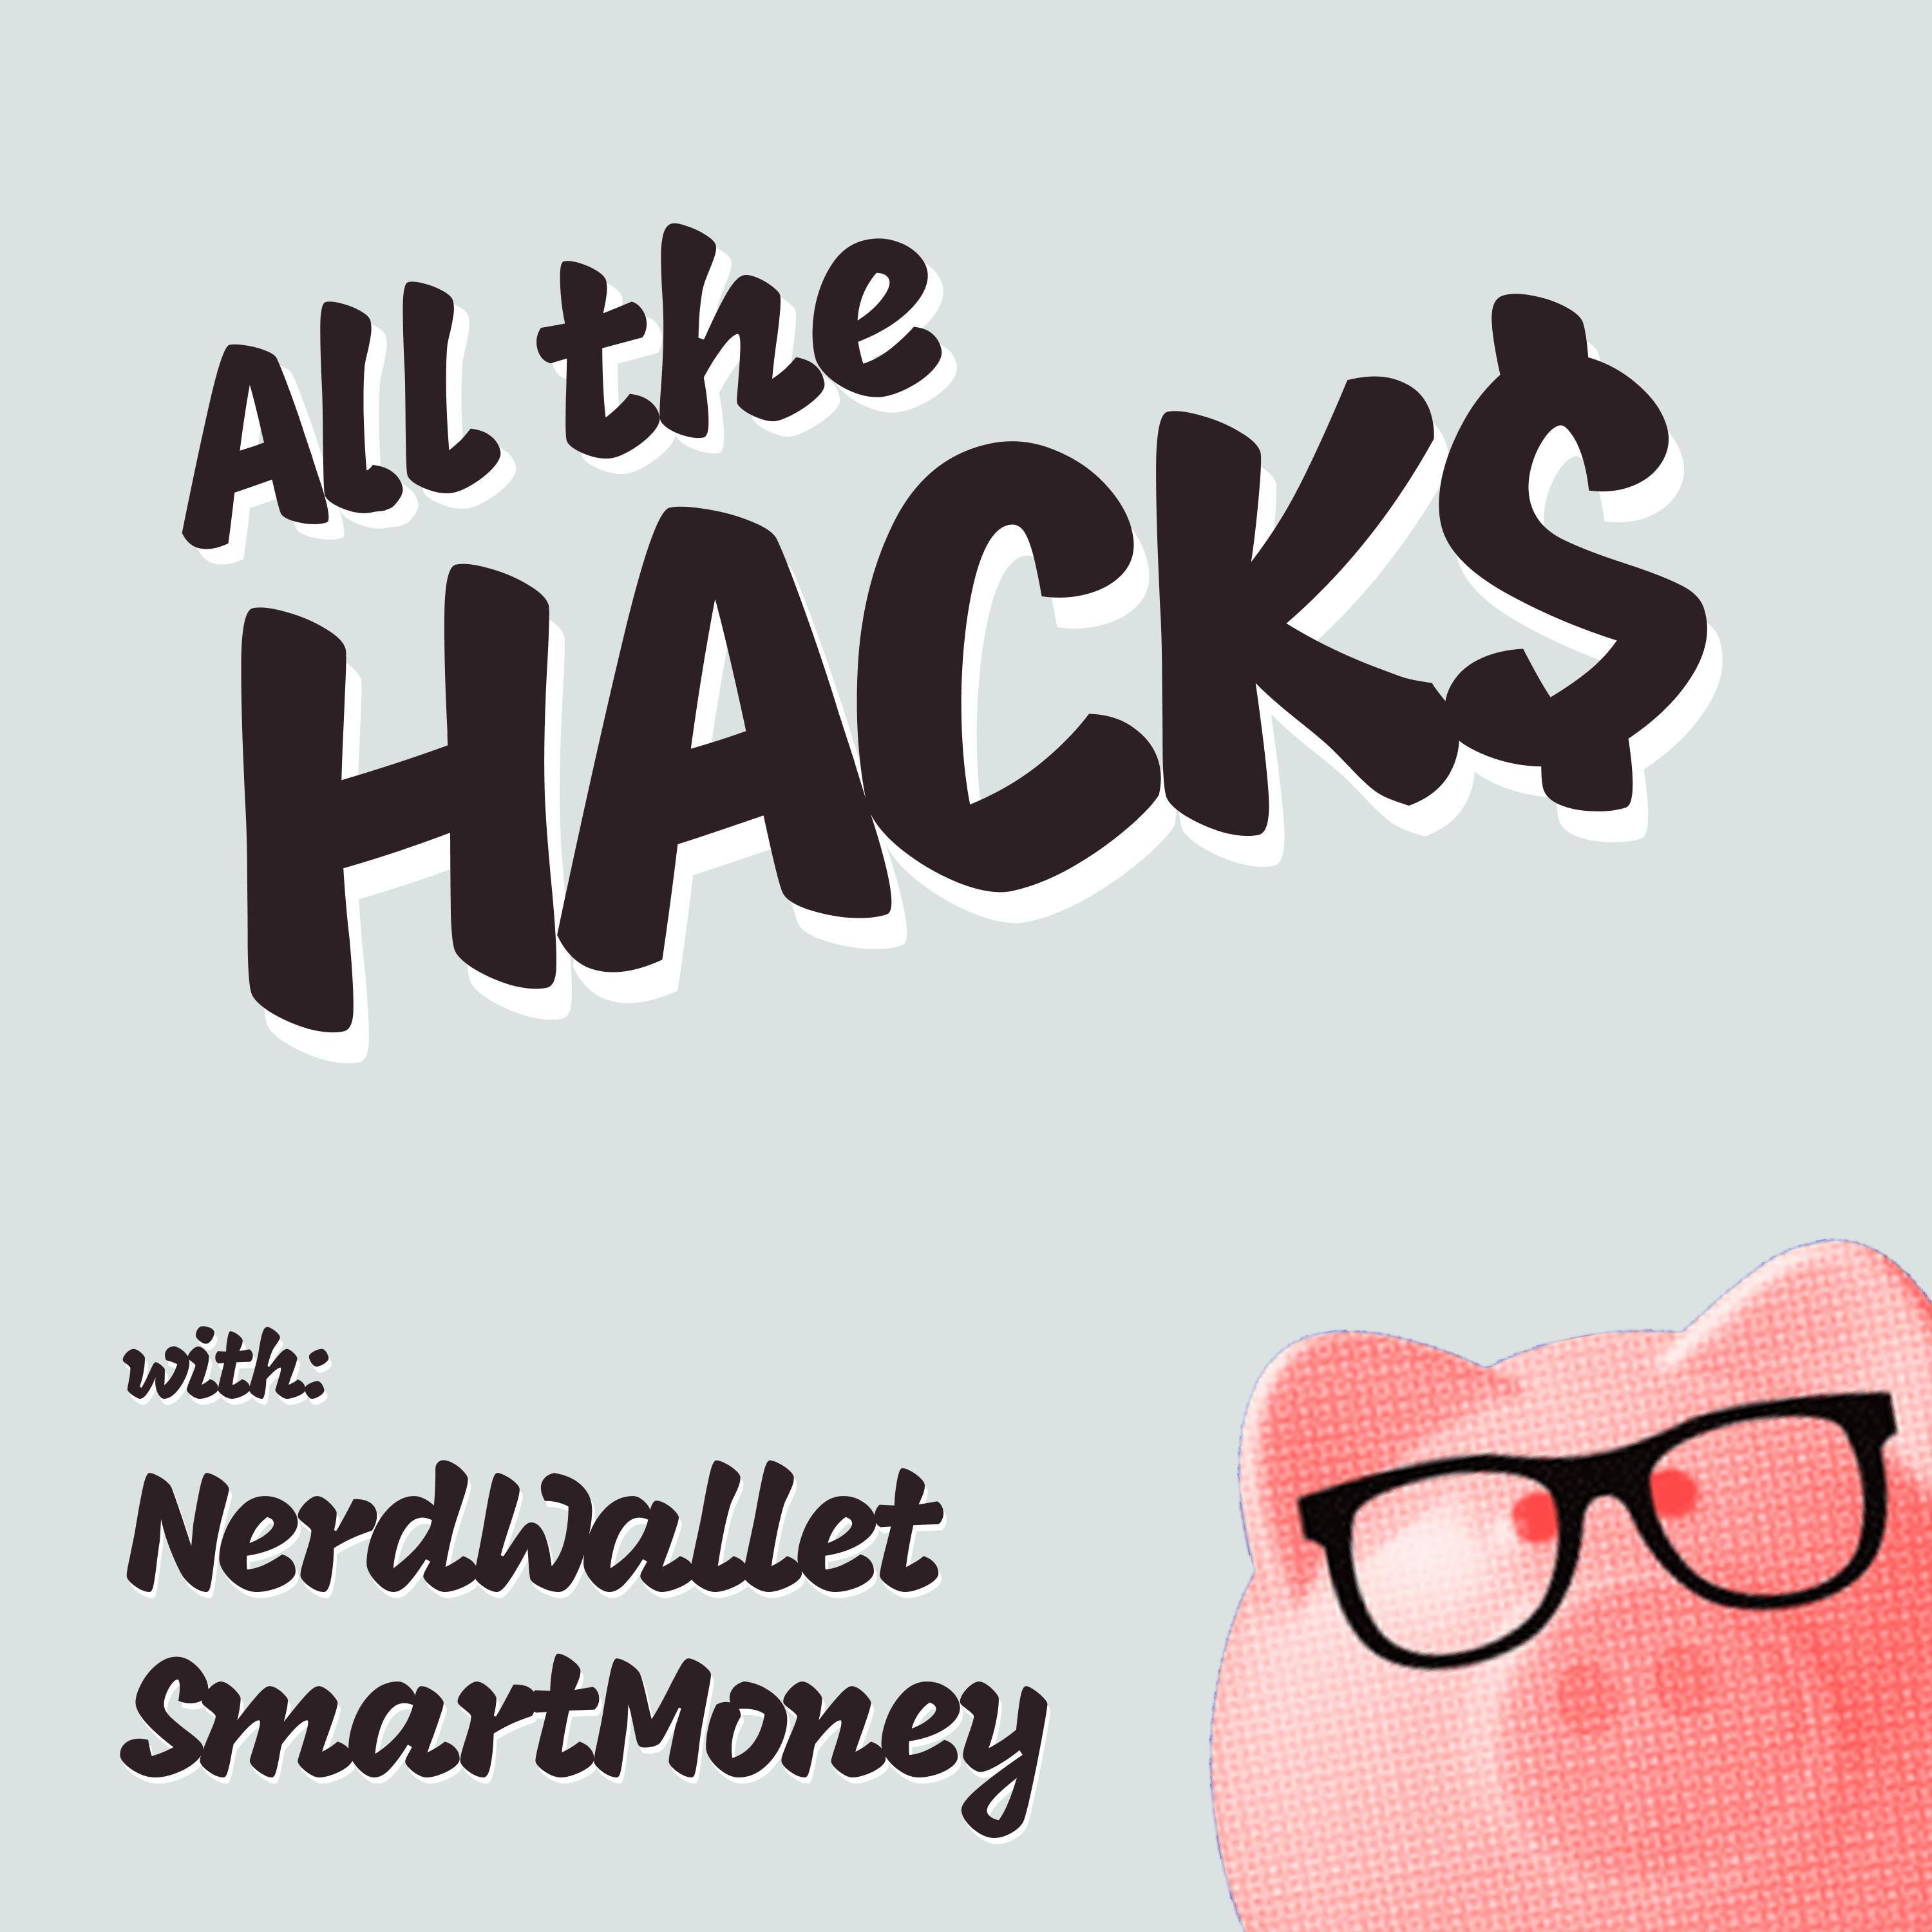 Digital Wallet Security and Credit Score Myth Debunking with NerdWallet's SmartMoney